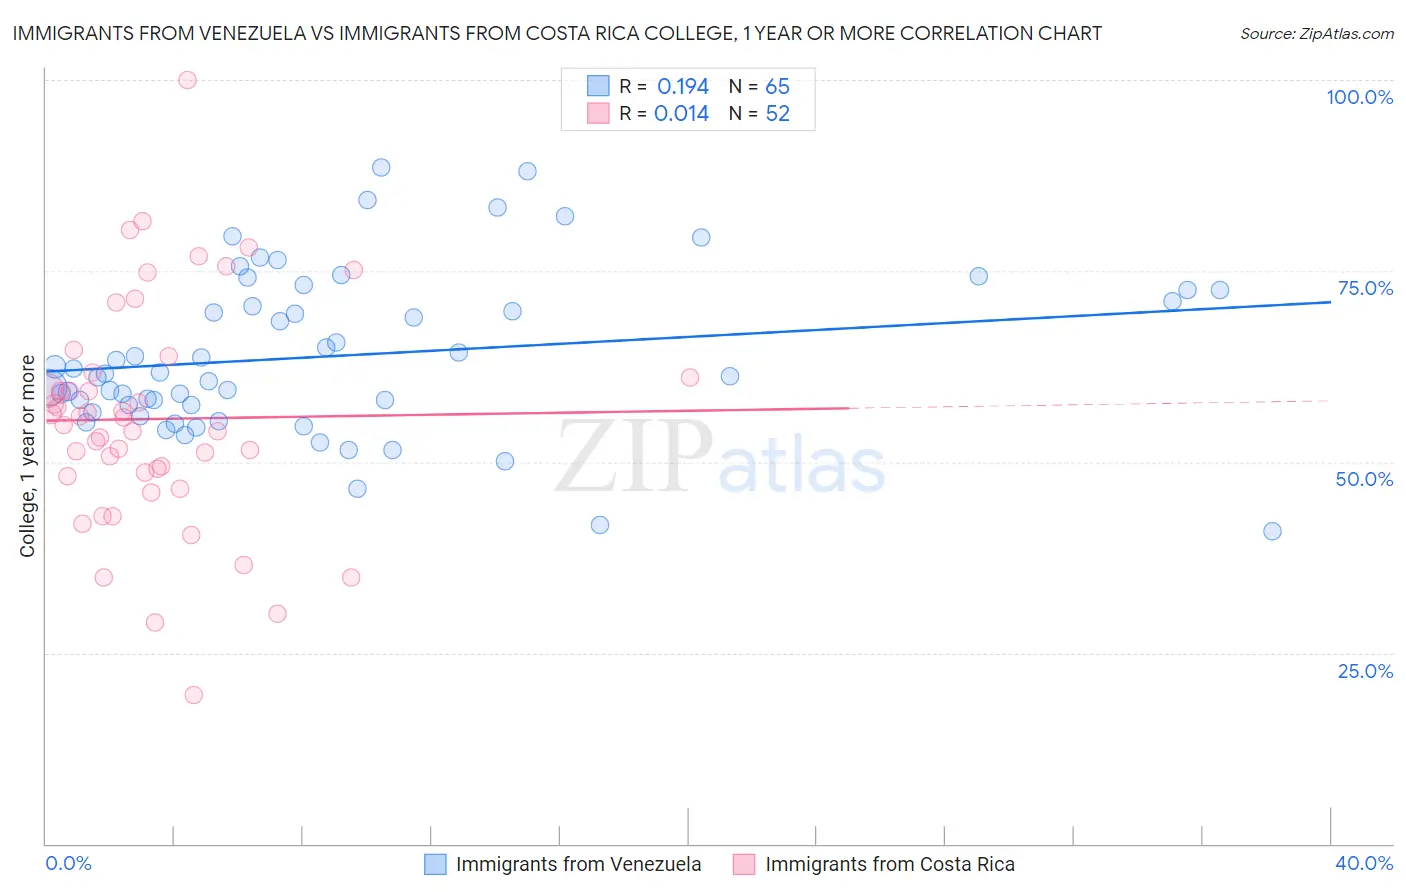 Immigrants from Venezuela vs Immigrants from Costa Rica College, 1 year or more